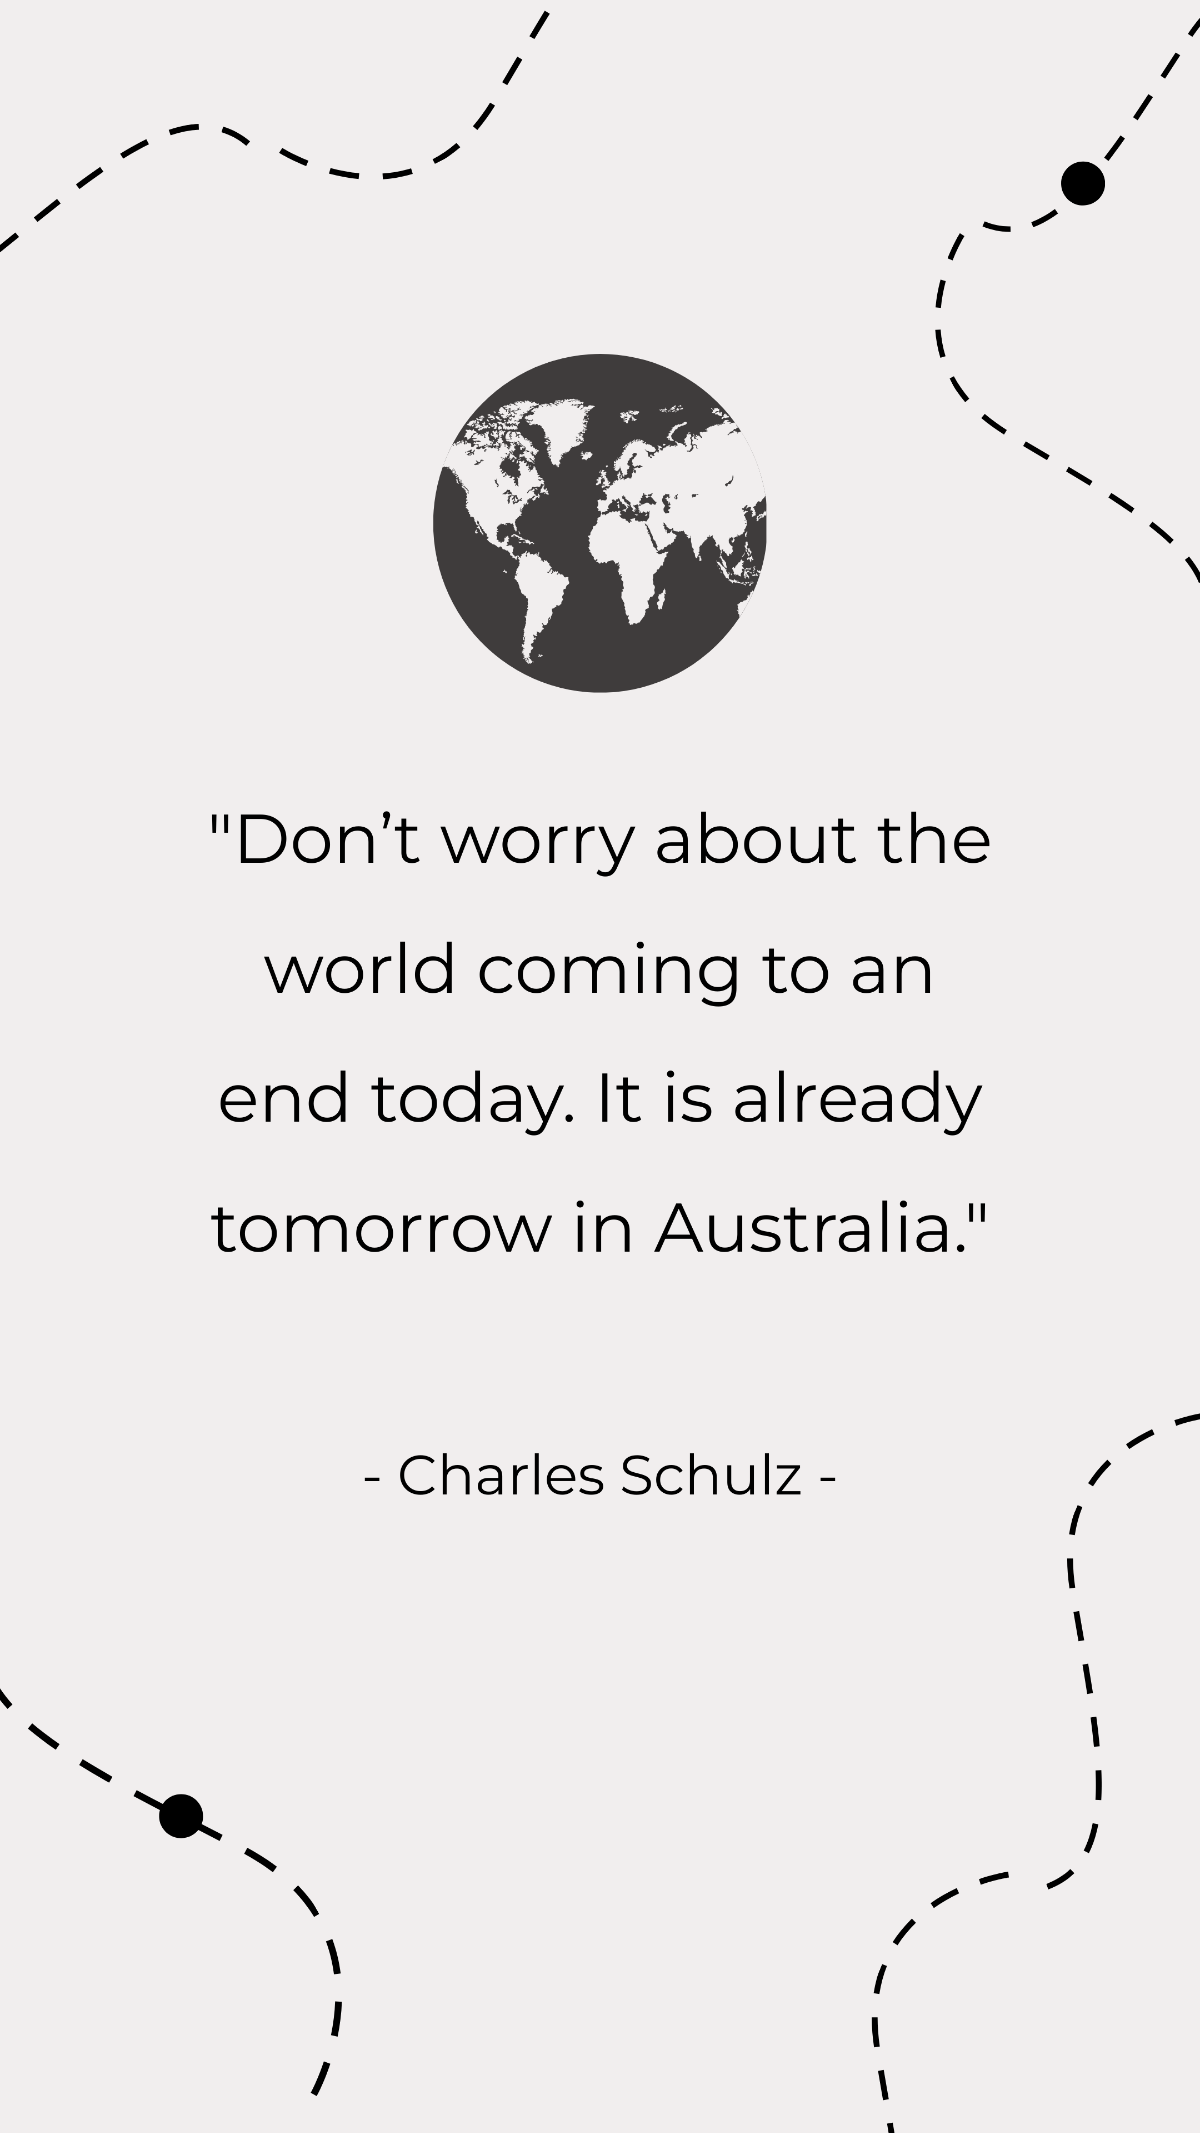 Charles Schulz - Don’t worry about the world coming to an end today. It is already tomorrow in Australia. Template